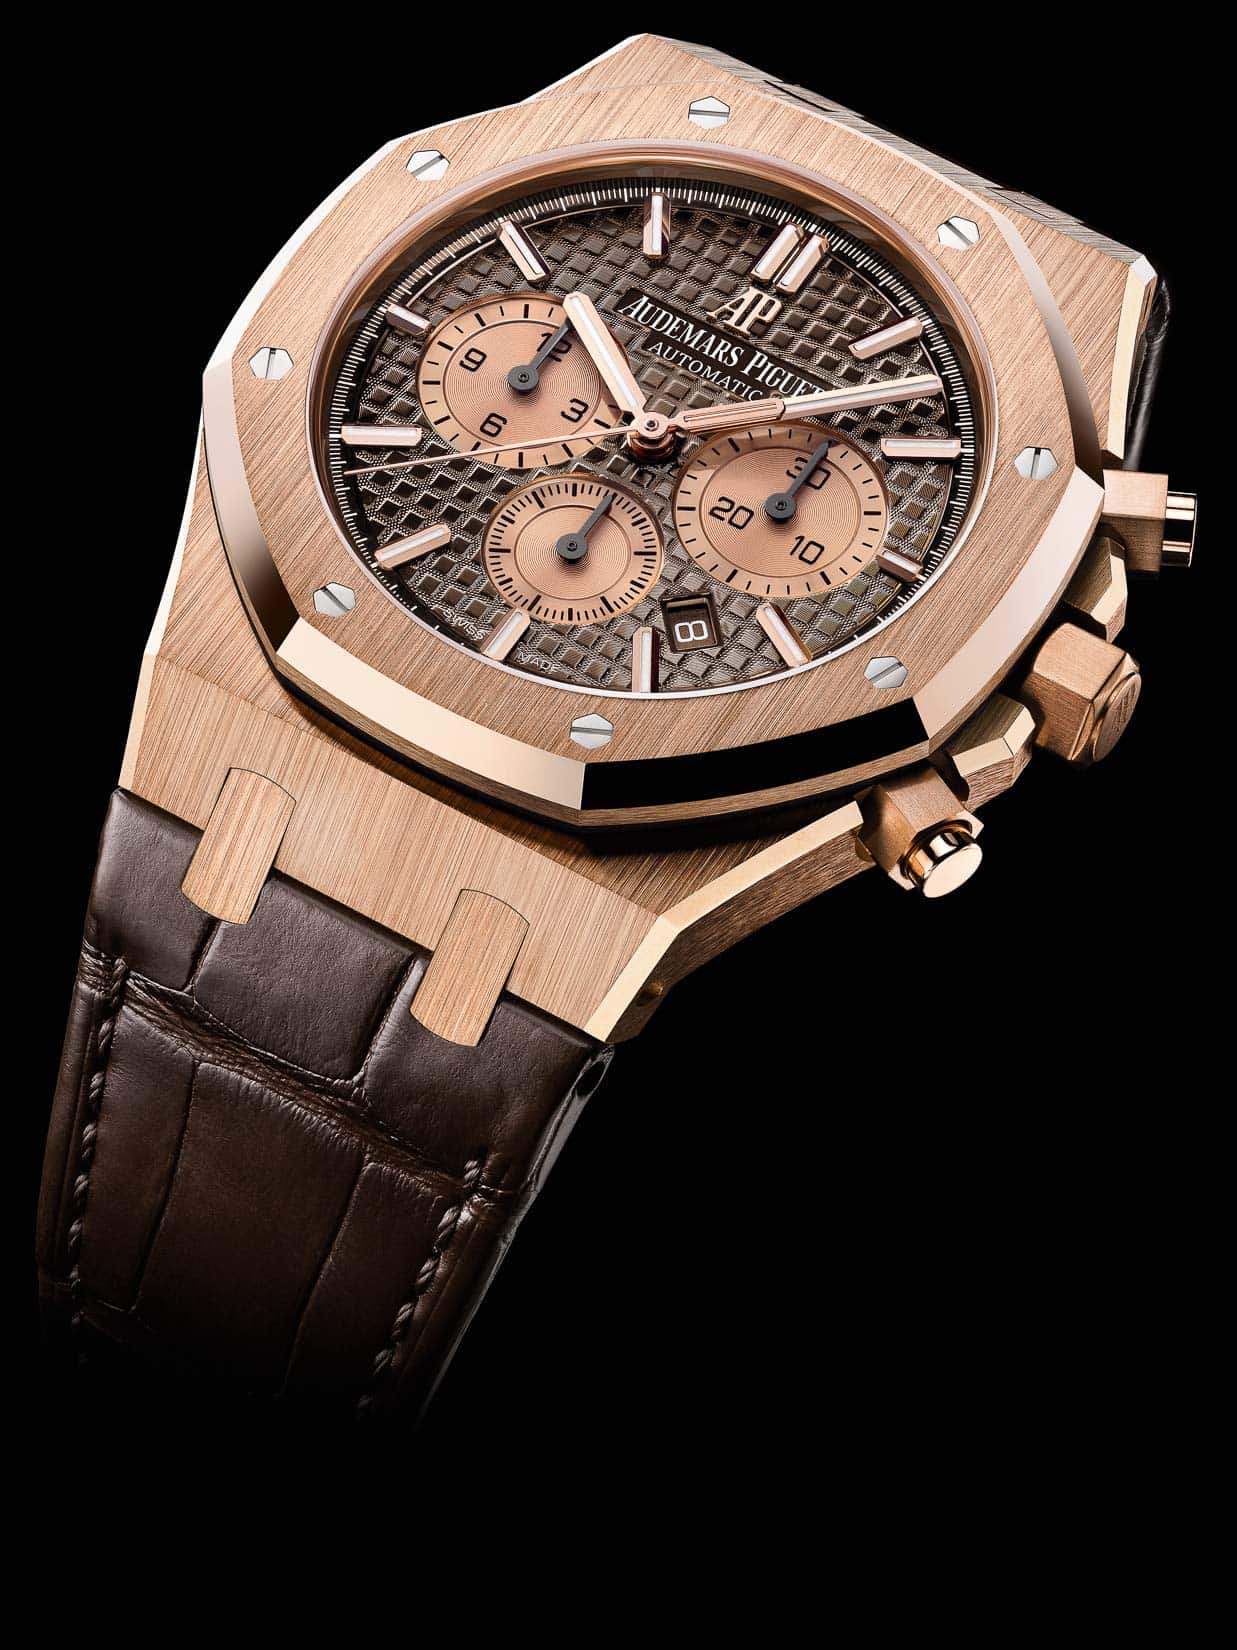 20 Years of Audemars Piguet Royal Oak Chronograph Watches - The 2017 ...